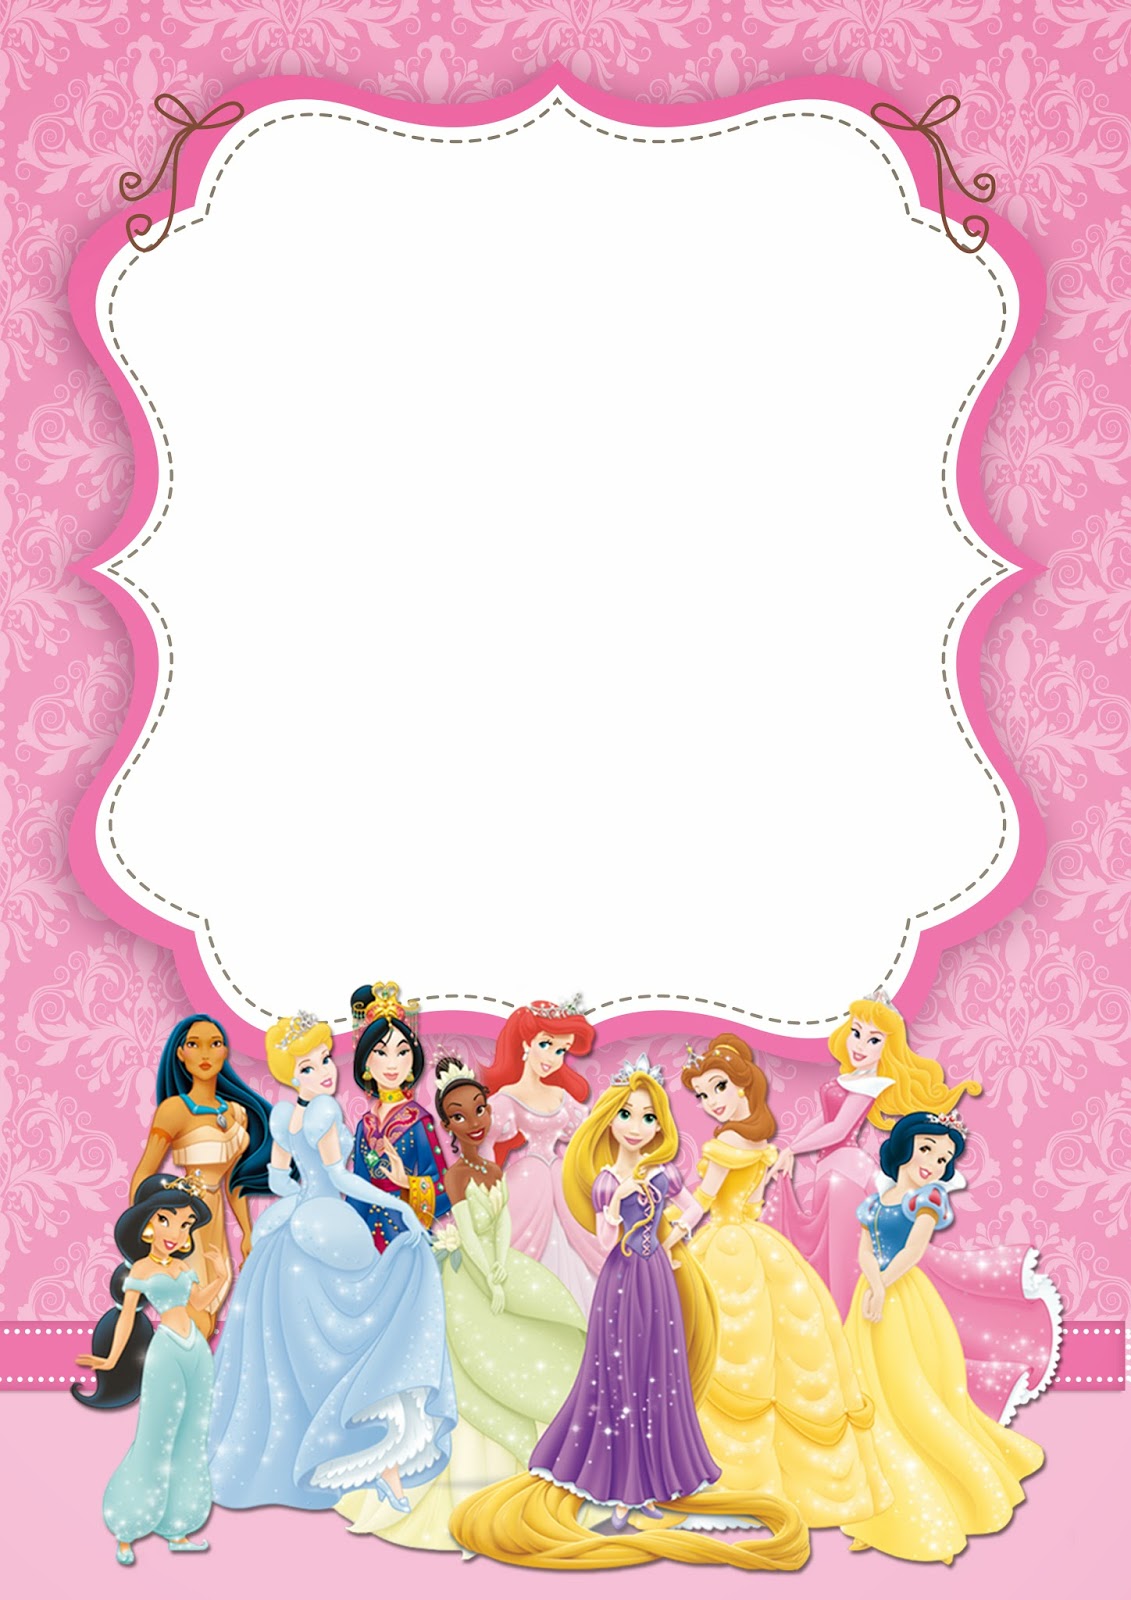 Disney Princess Party Free Printable Party Invitations Oh My Fiesta 